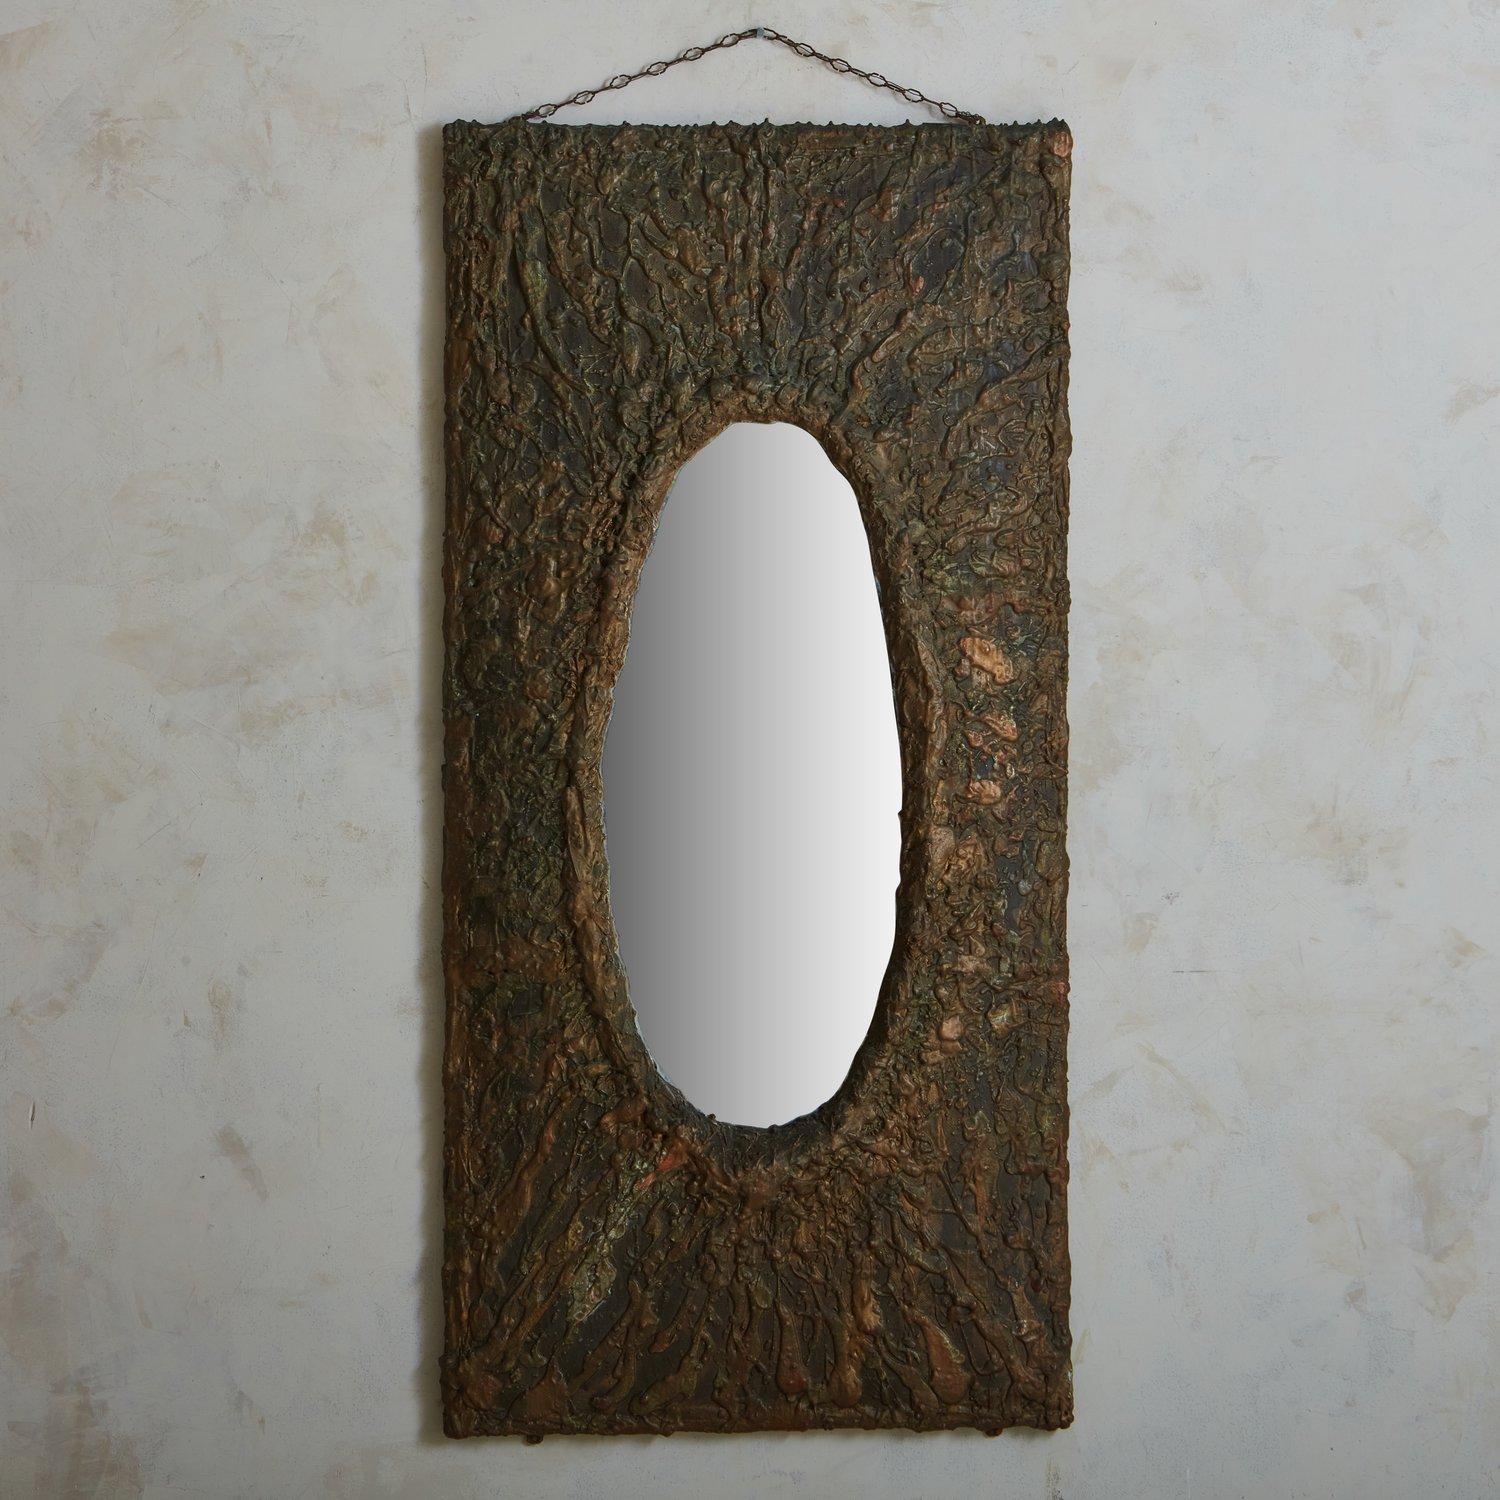 A monumental 1980s Italian mirror featuring a textured rectangular frame constructed with copper and resin with a beautiful green hue. The frame supports an inset oval mirror. Unmarked. Sourced in Italy, 1980s.